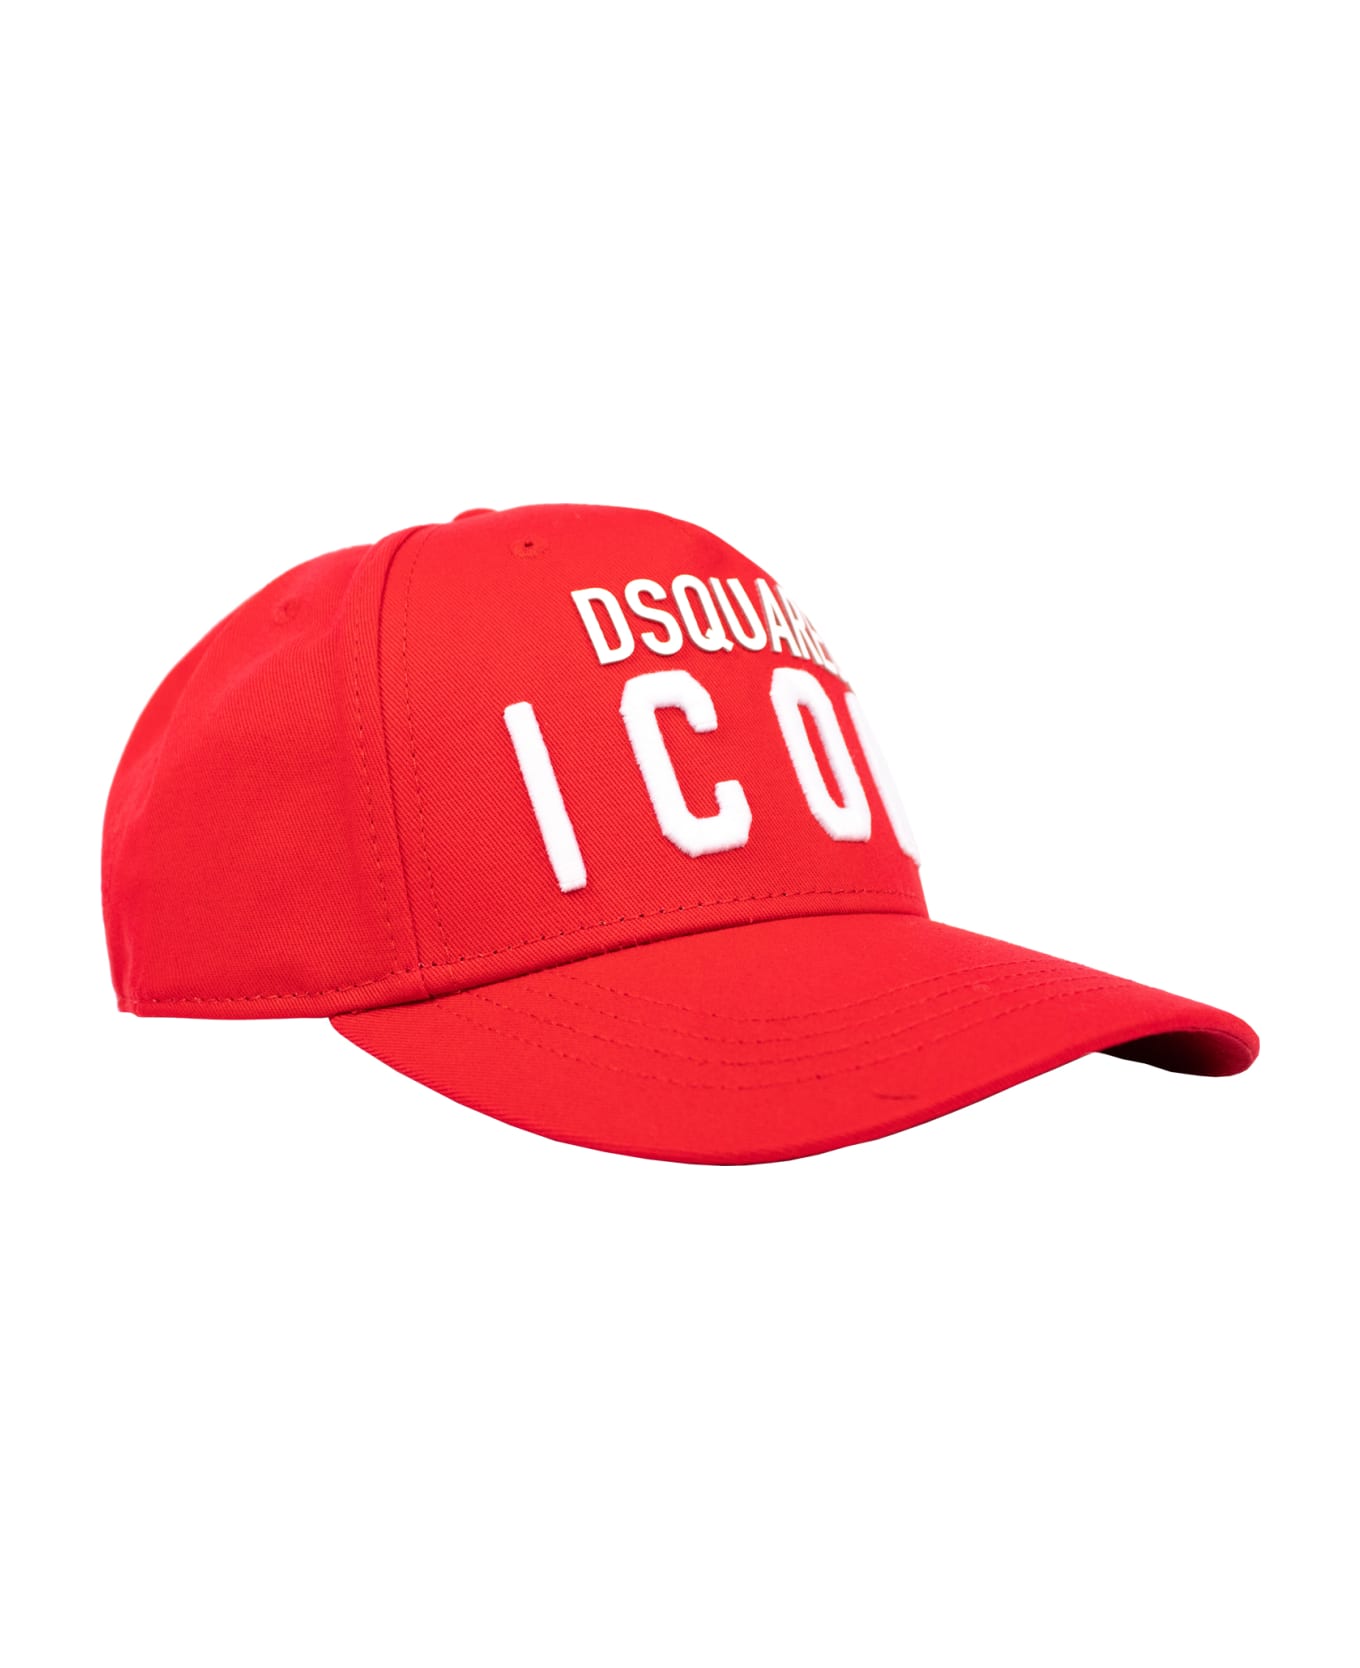 Dsquared2 "icon" Baseball Hat - Red アクセサリー＆ギフト